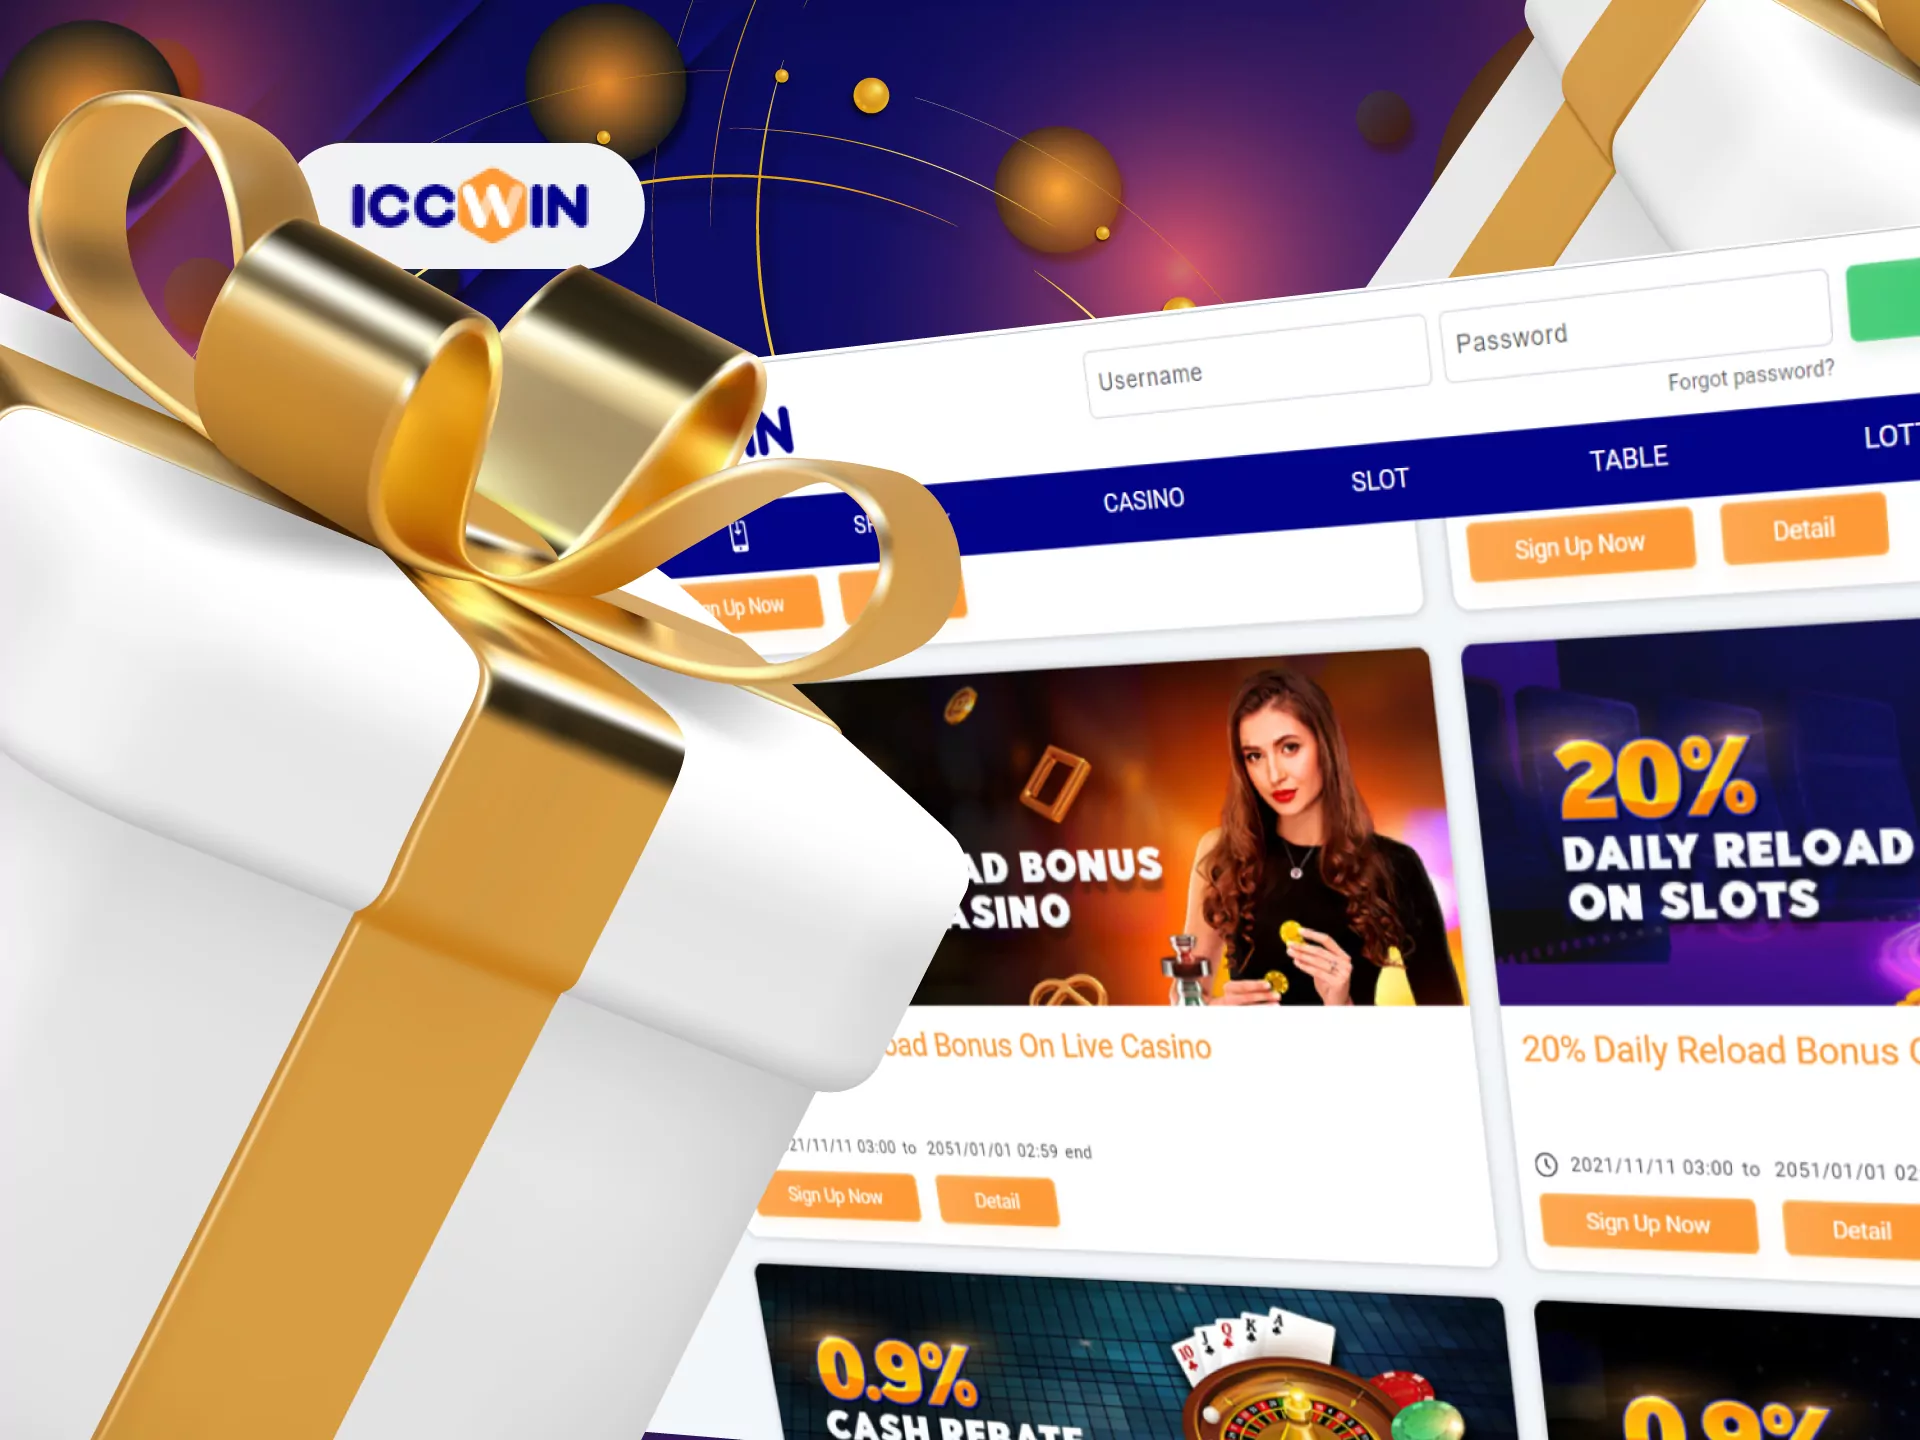 ICCWIN offers many bonuses for its bettors and casino players.